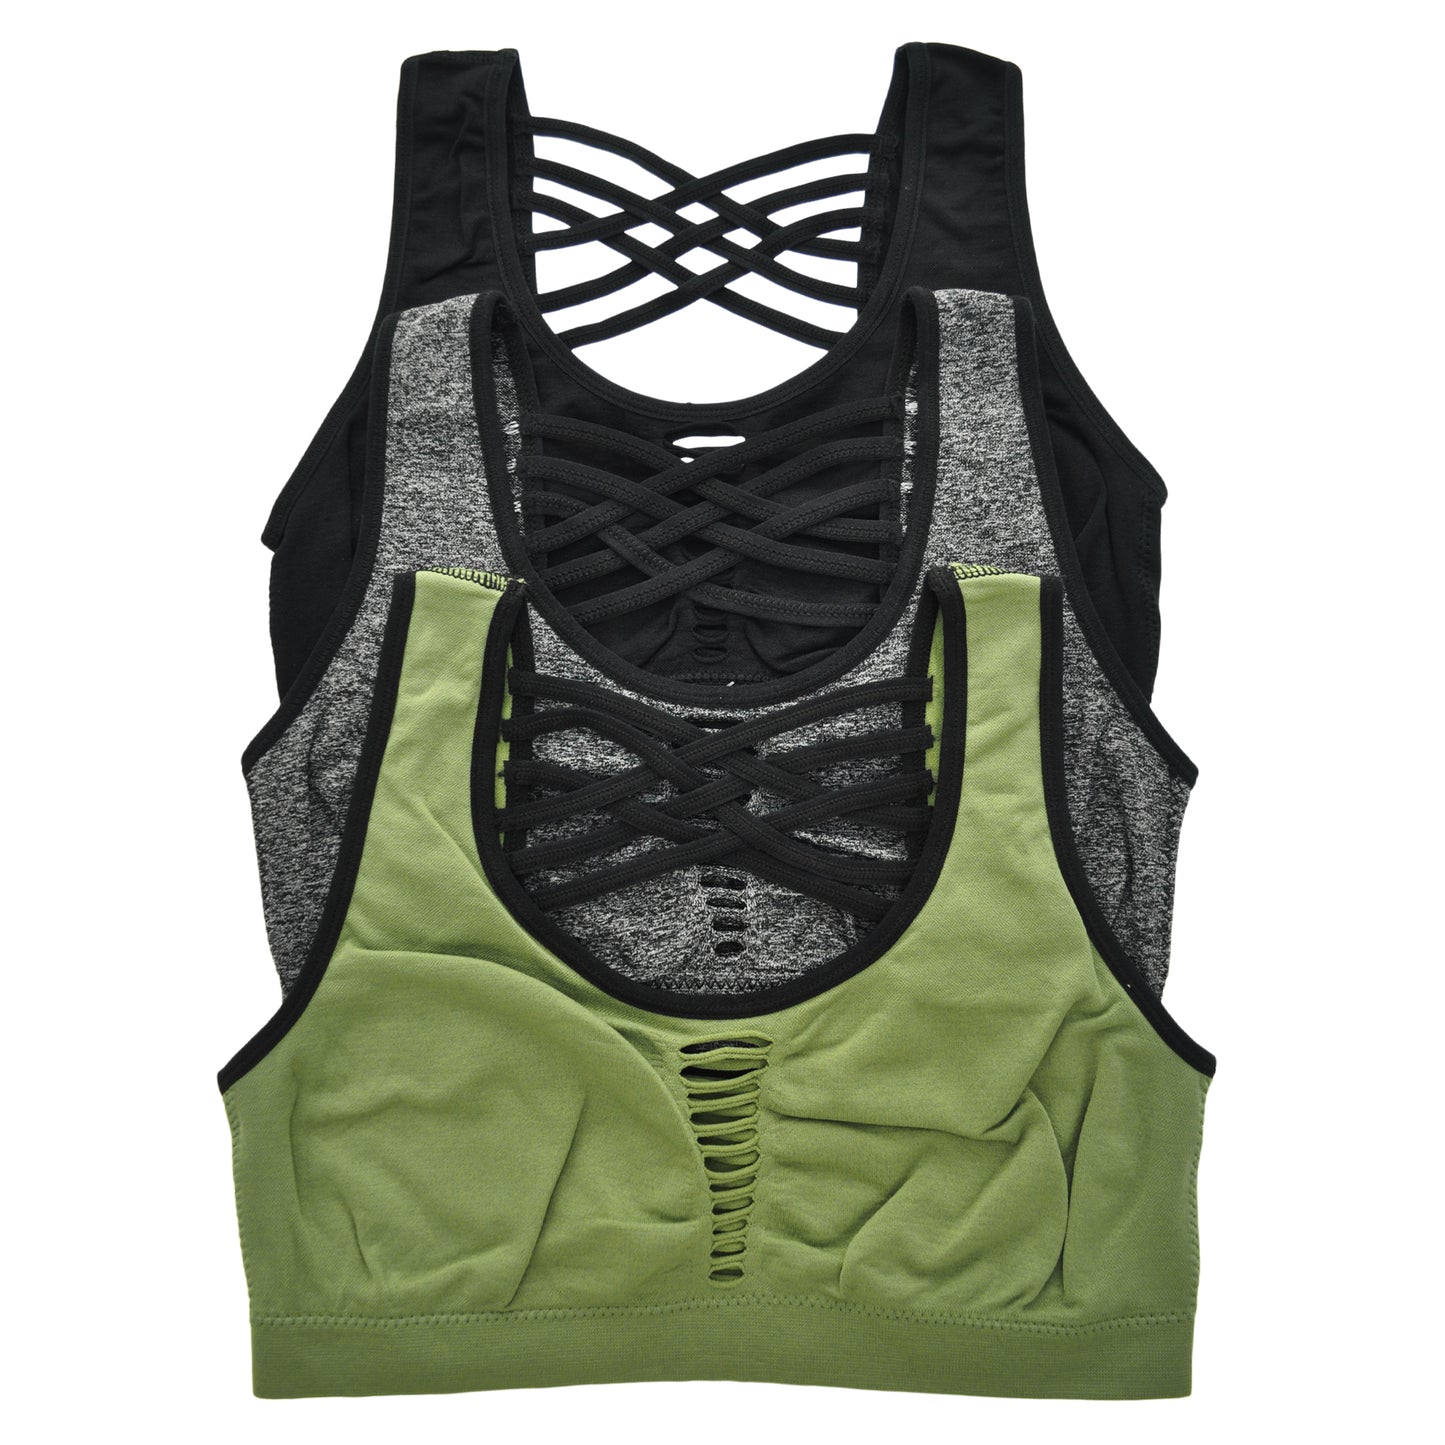 Seamless Wire-free Sports Bra with Strappy Back (3-Pack)